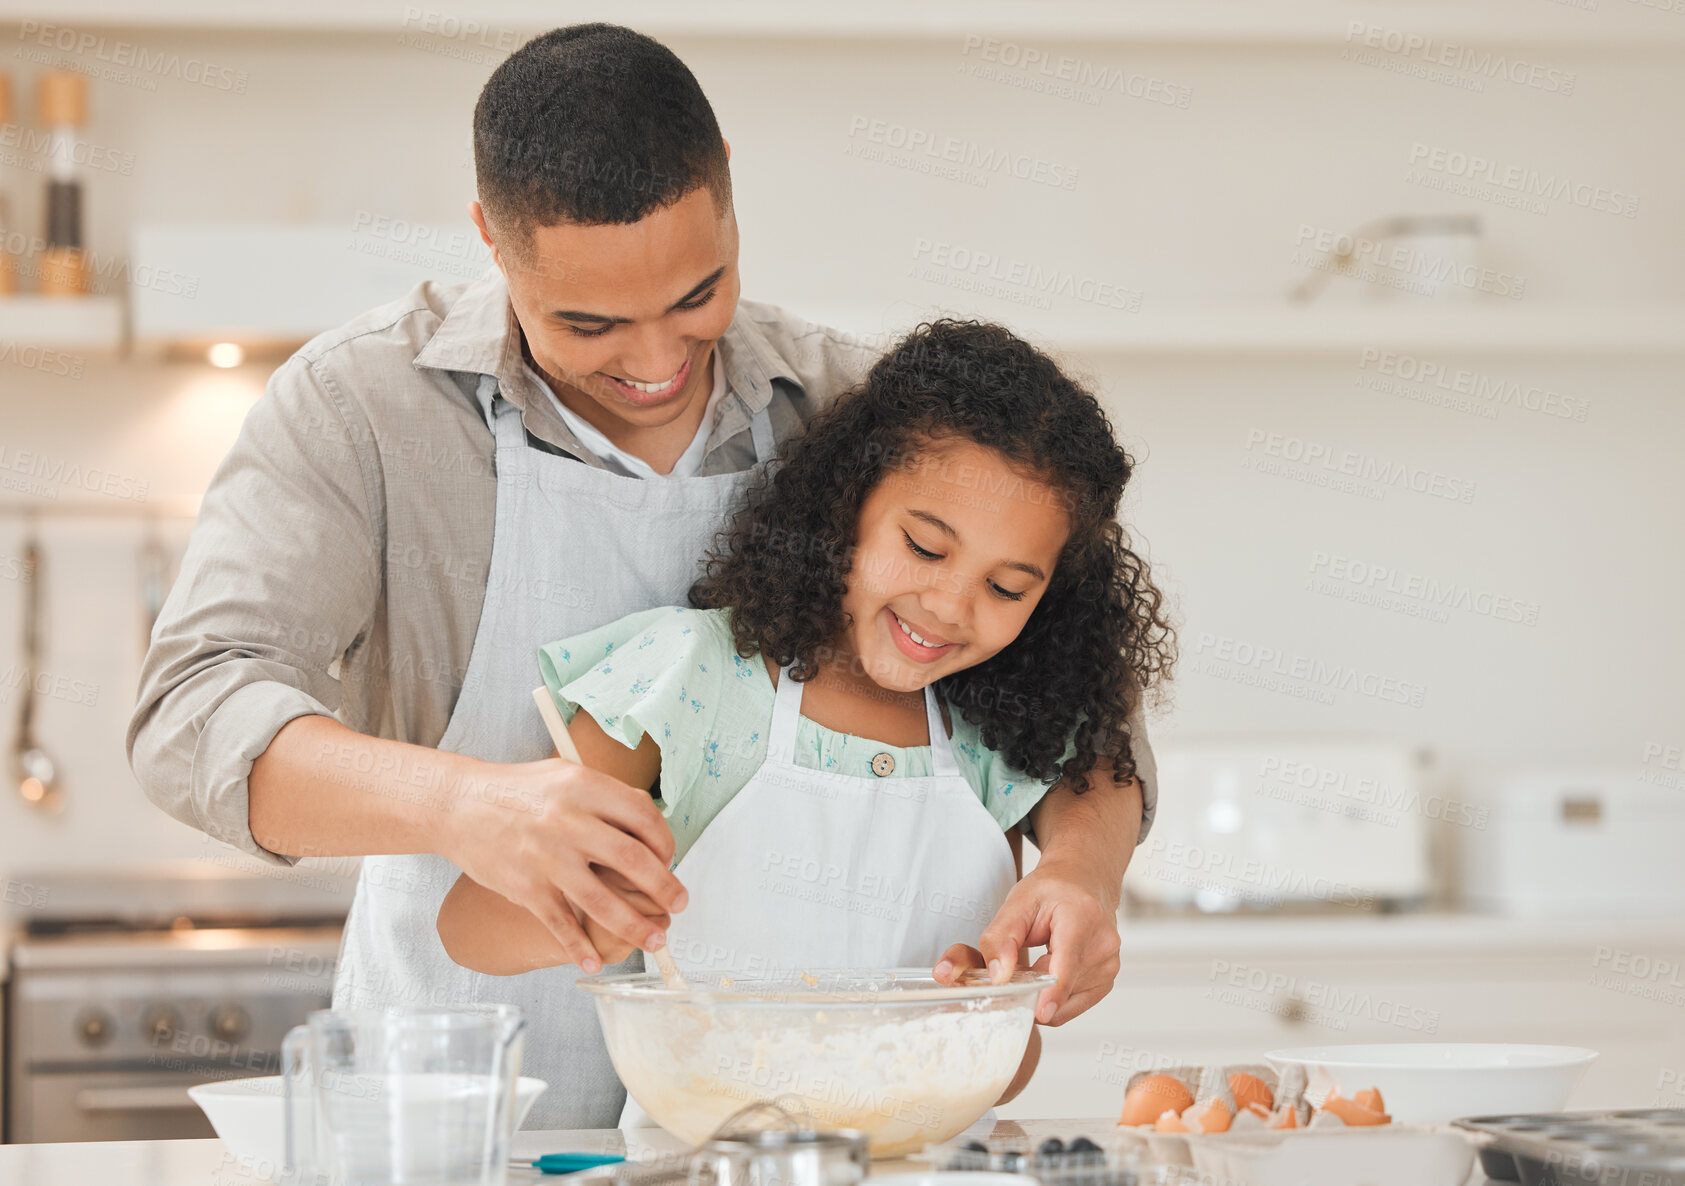 Buy stock photo Shot of a young father helping his daughter bake